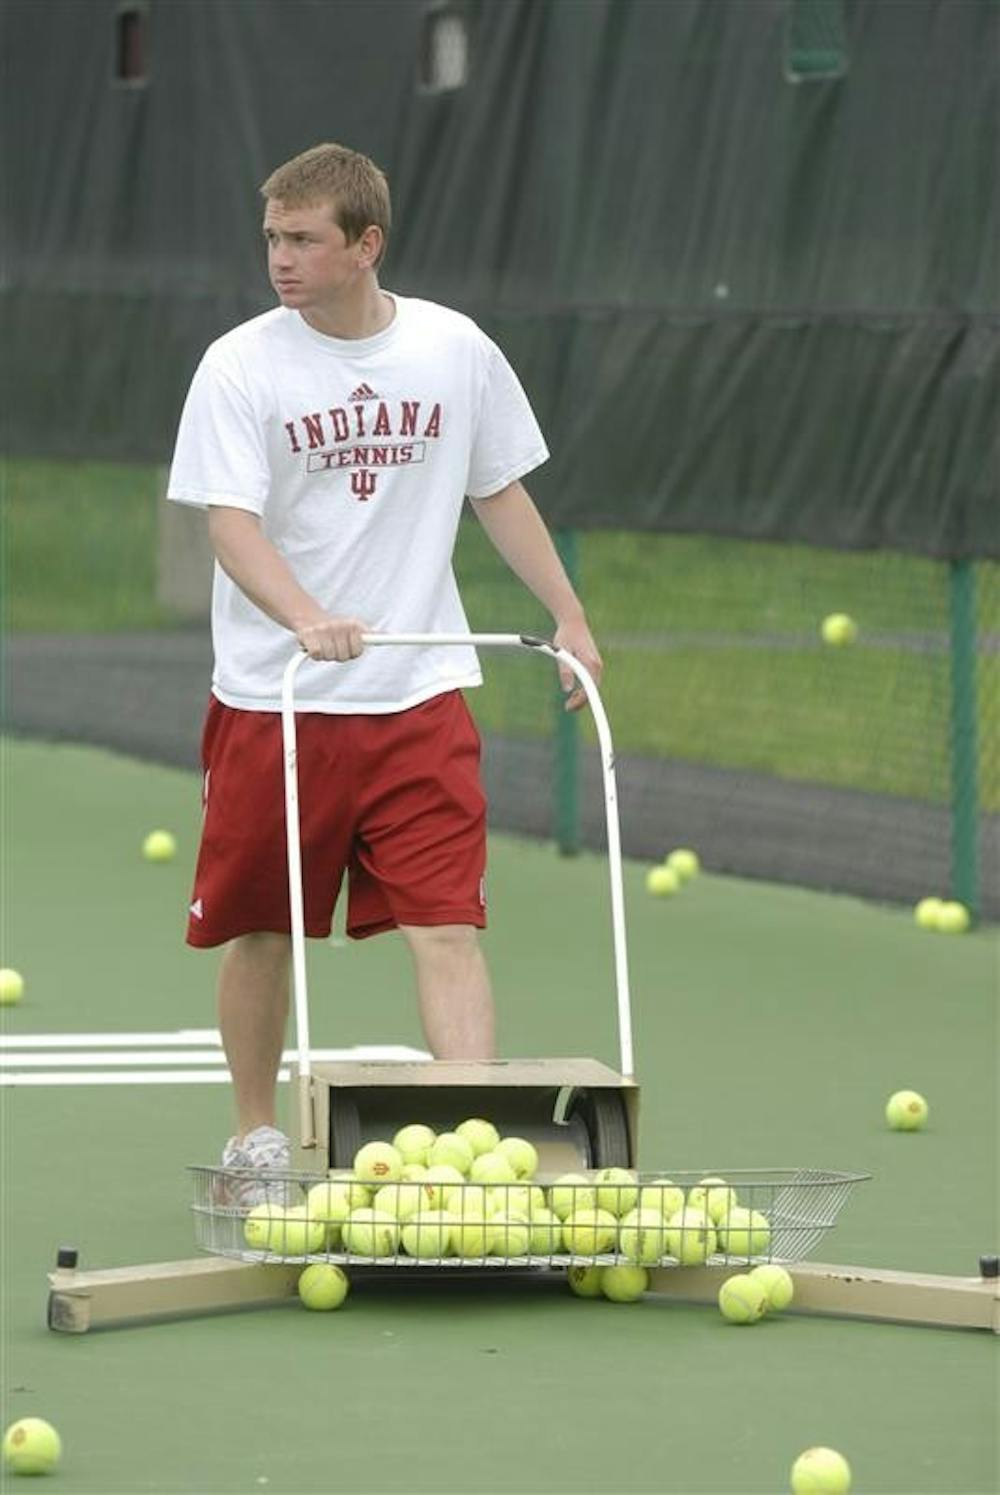 Senior Todd Reed, a four–year manager of the men's tennis team, collects tennis balls during practice Tuesday at the IU Tennis Center. Reed and his brother Scott, a 1997 graduate, both managed for the men's tennis team during their four years at IU.